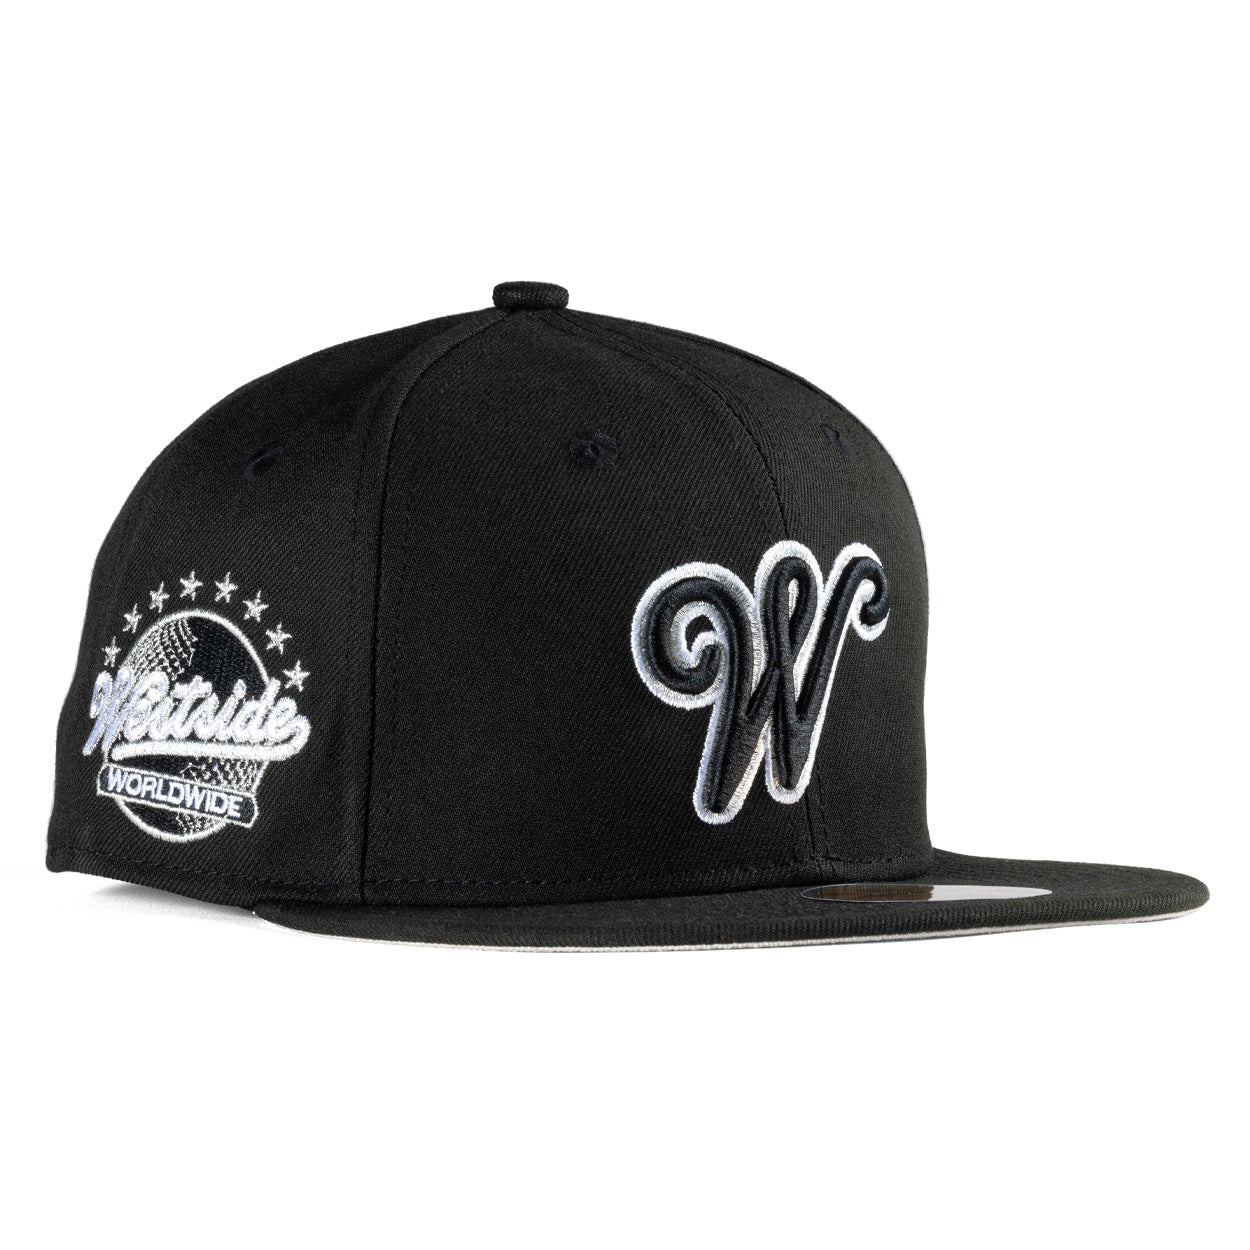 Worldwide WSL Fitted